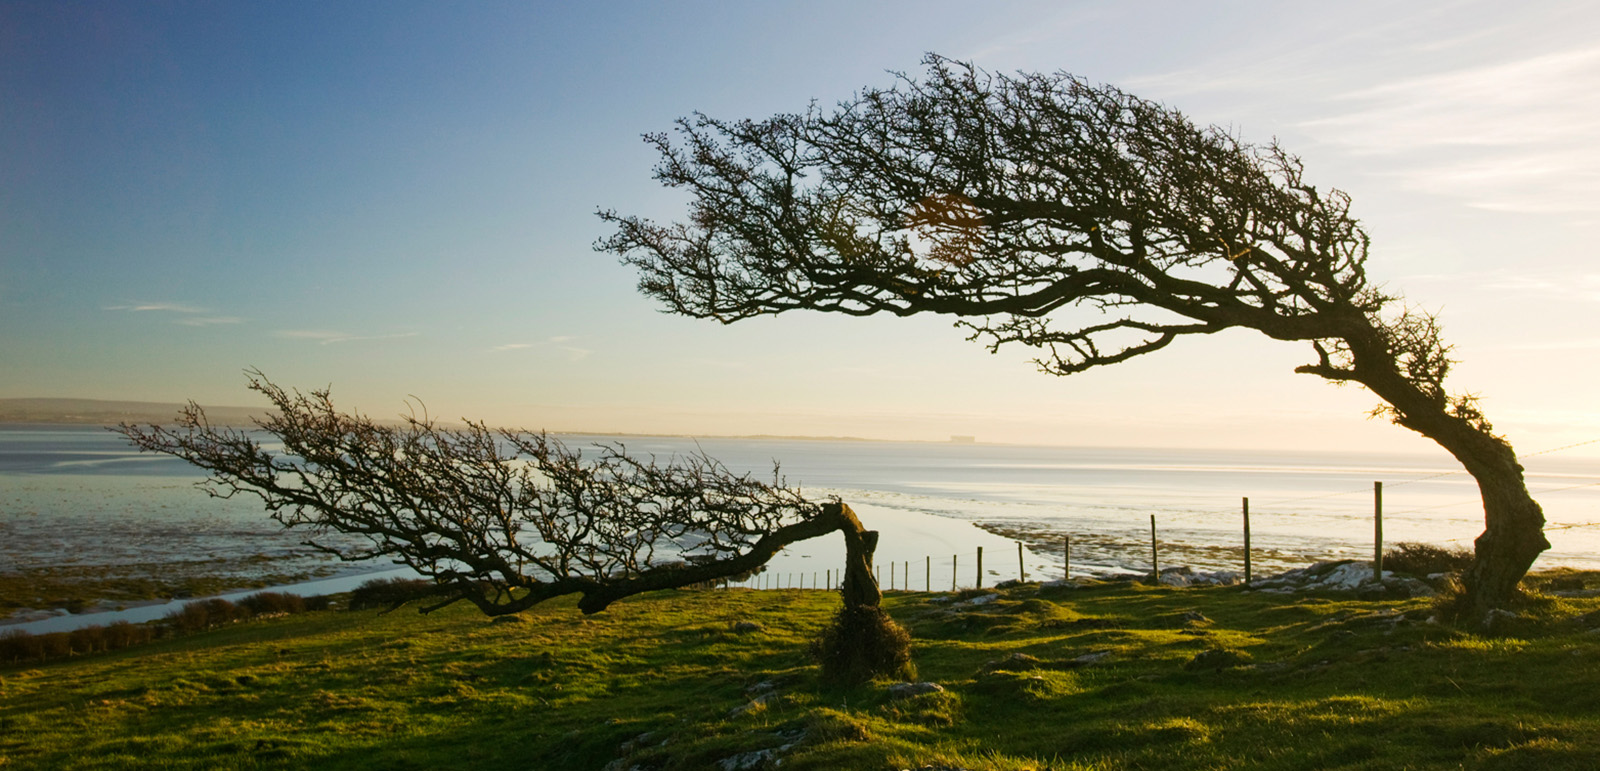 Hawthorn trees bent by the prevailing wind on Humphrey Head Point on Morecambe Bay, Cumbria, UK. Photo by Ashley Cooper/Getty Images